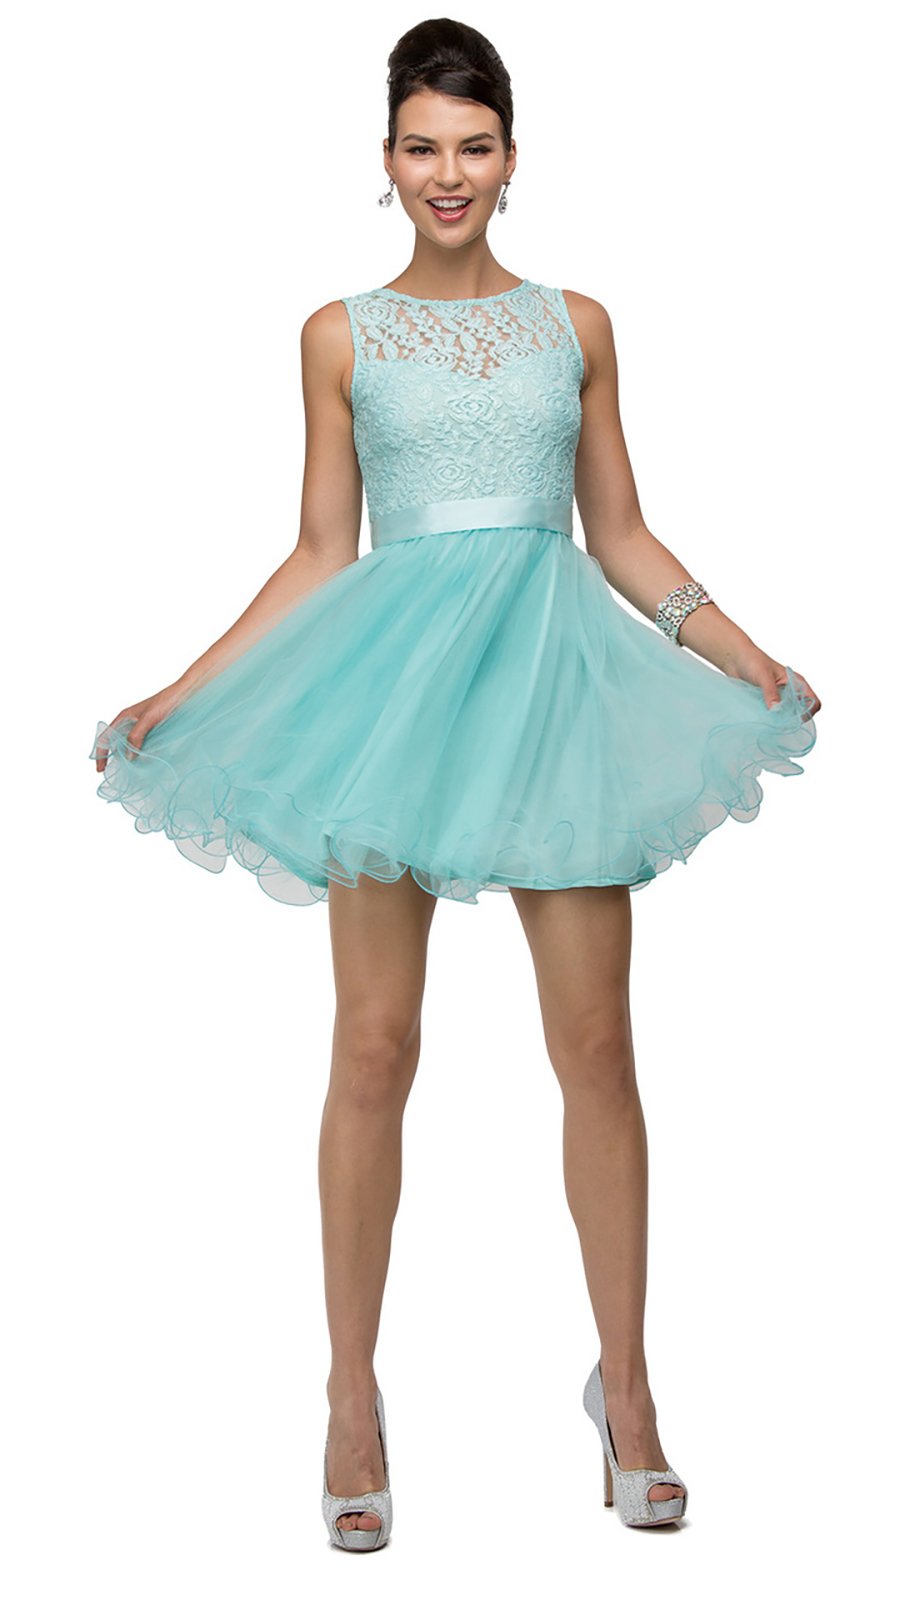 Dancing Queen - 8741SC Sleeveless Lace Bodice Tulle A-line Dress